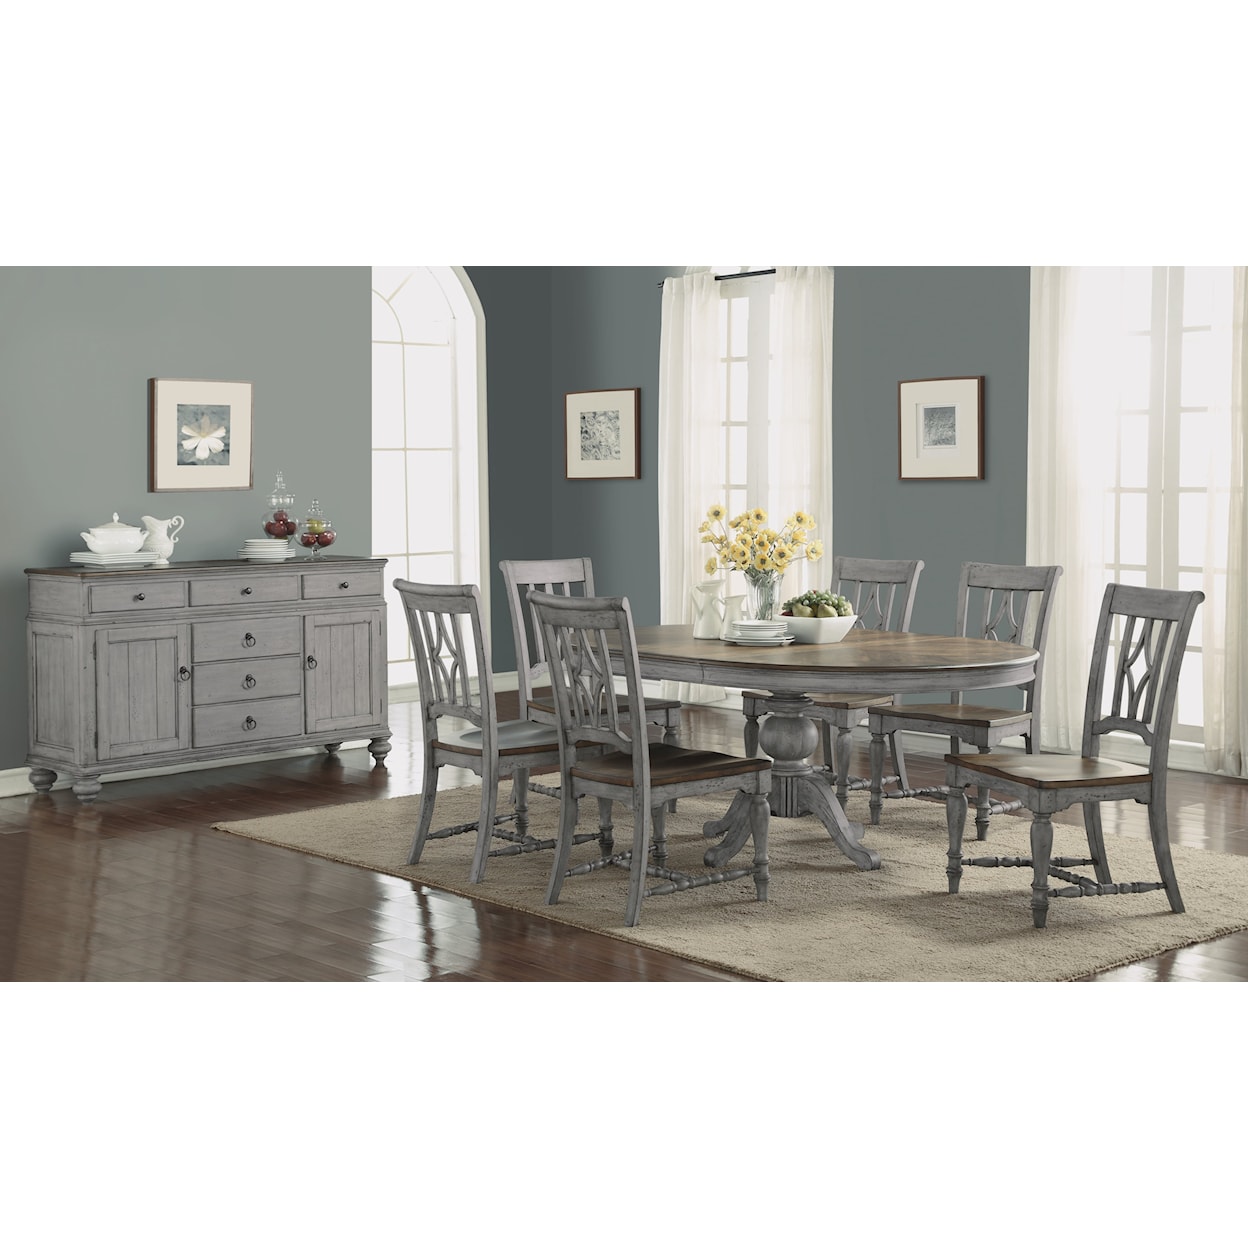 Flexsteel Casegoods Plymouth Table and Chair Set